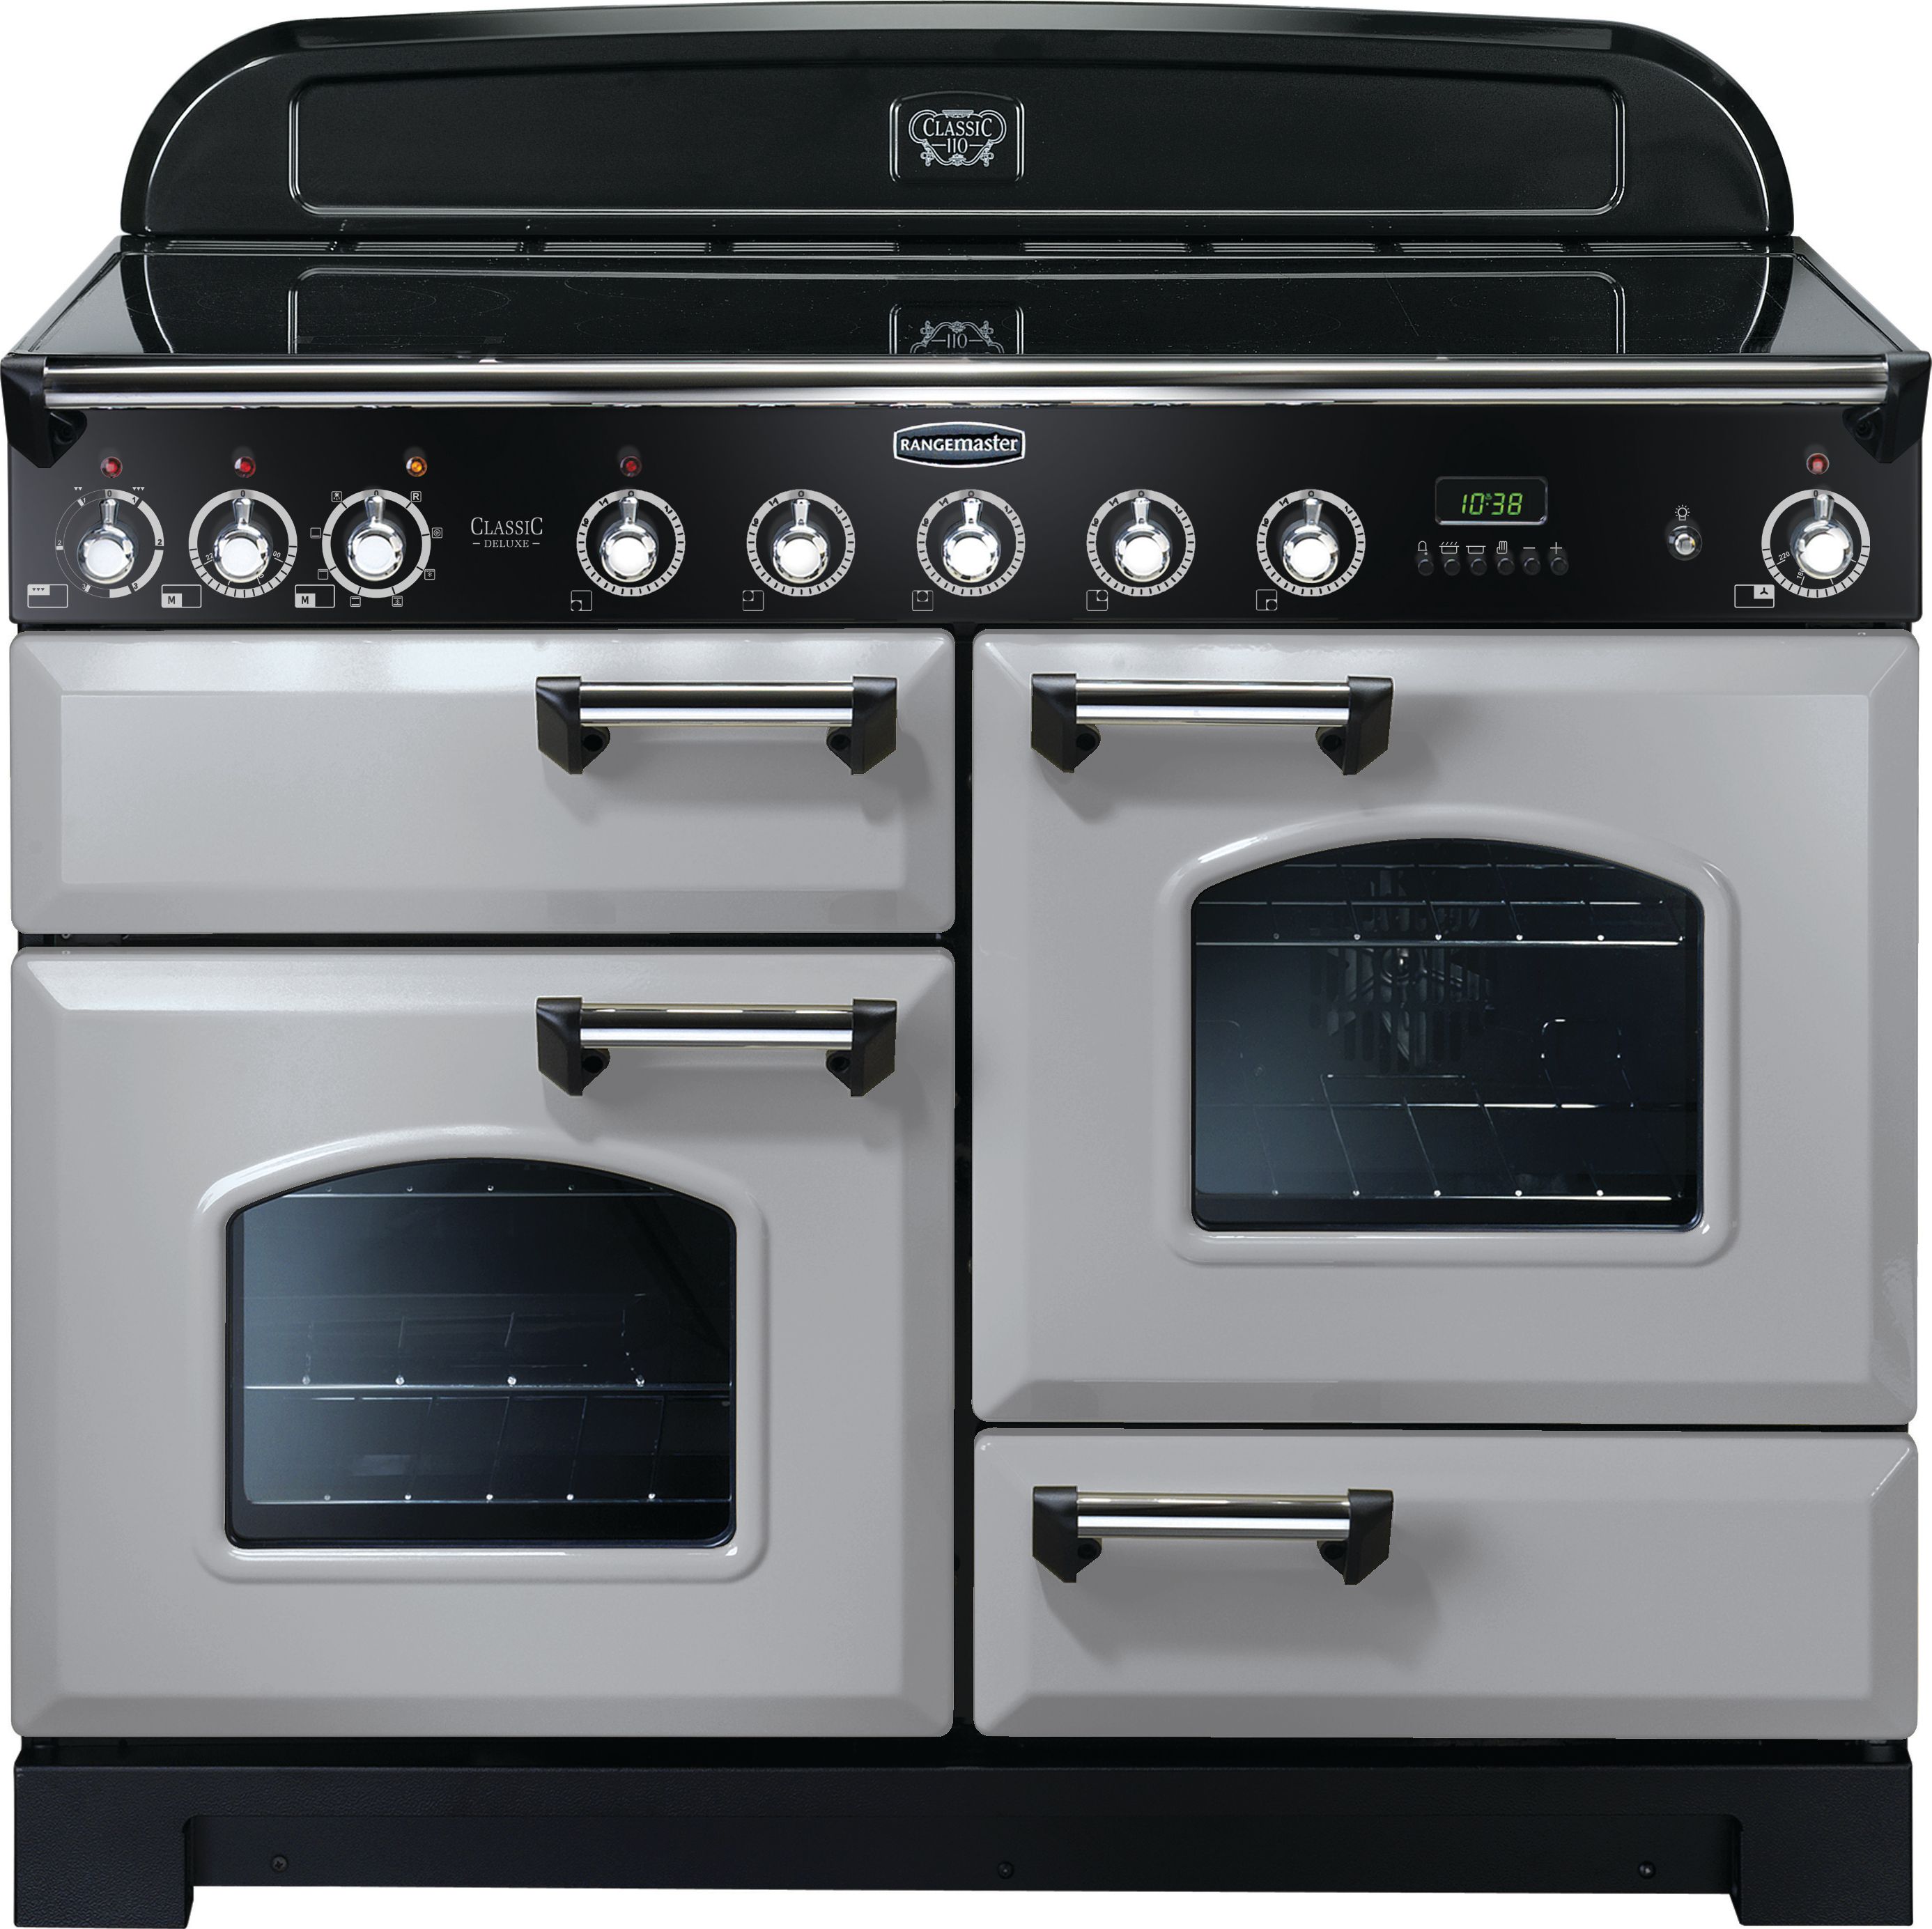 Rangemaster Classic Deluxe CDL110EIRP/C 110cm Electric Range Cooker with Induction Hob - Royal Pearl / Chrome - A/A Rated, Grey